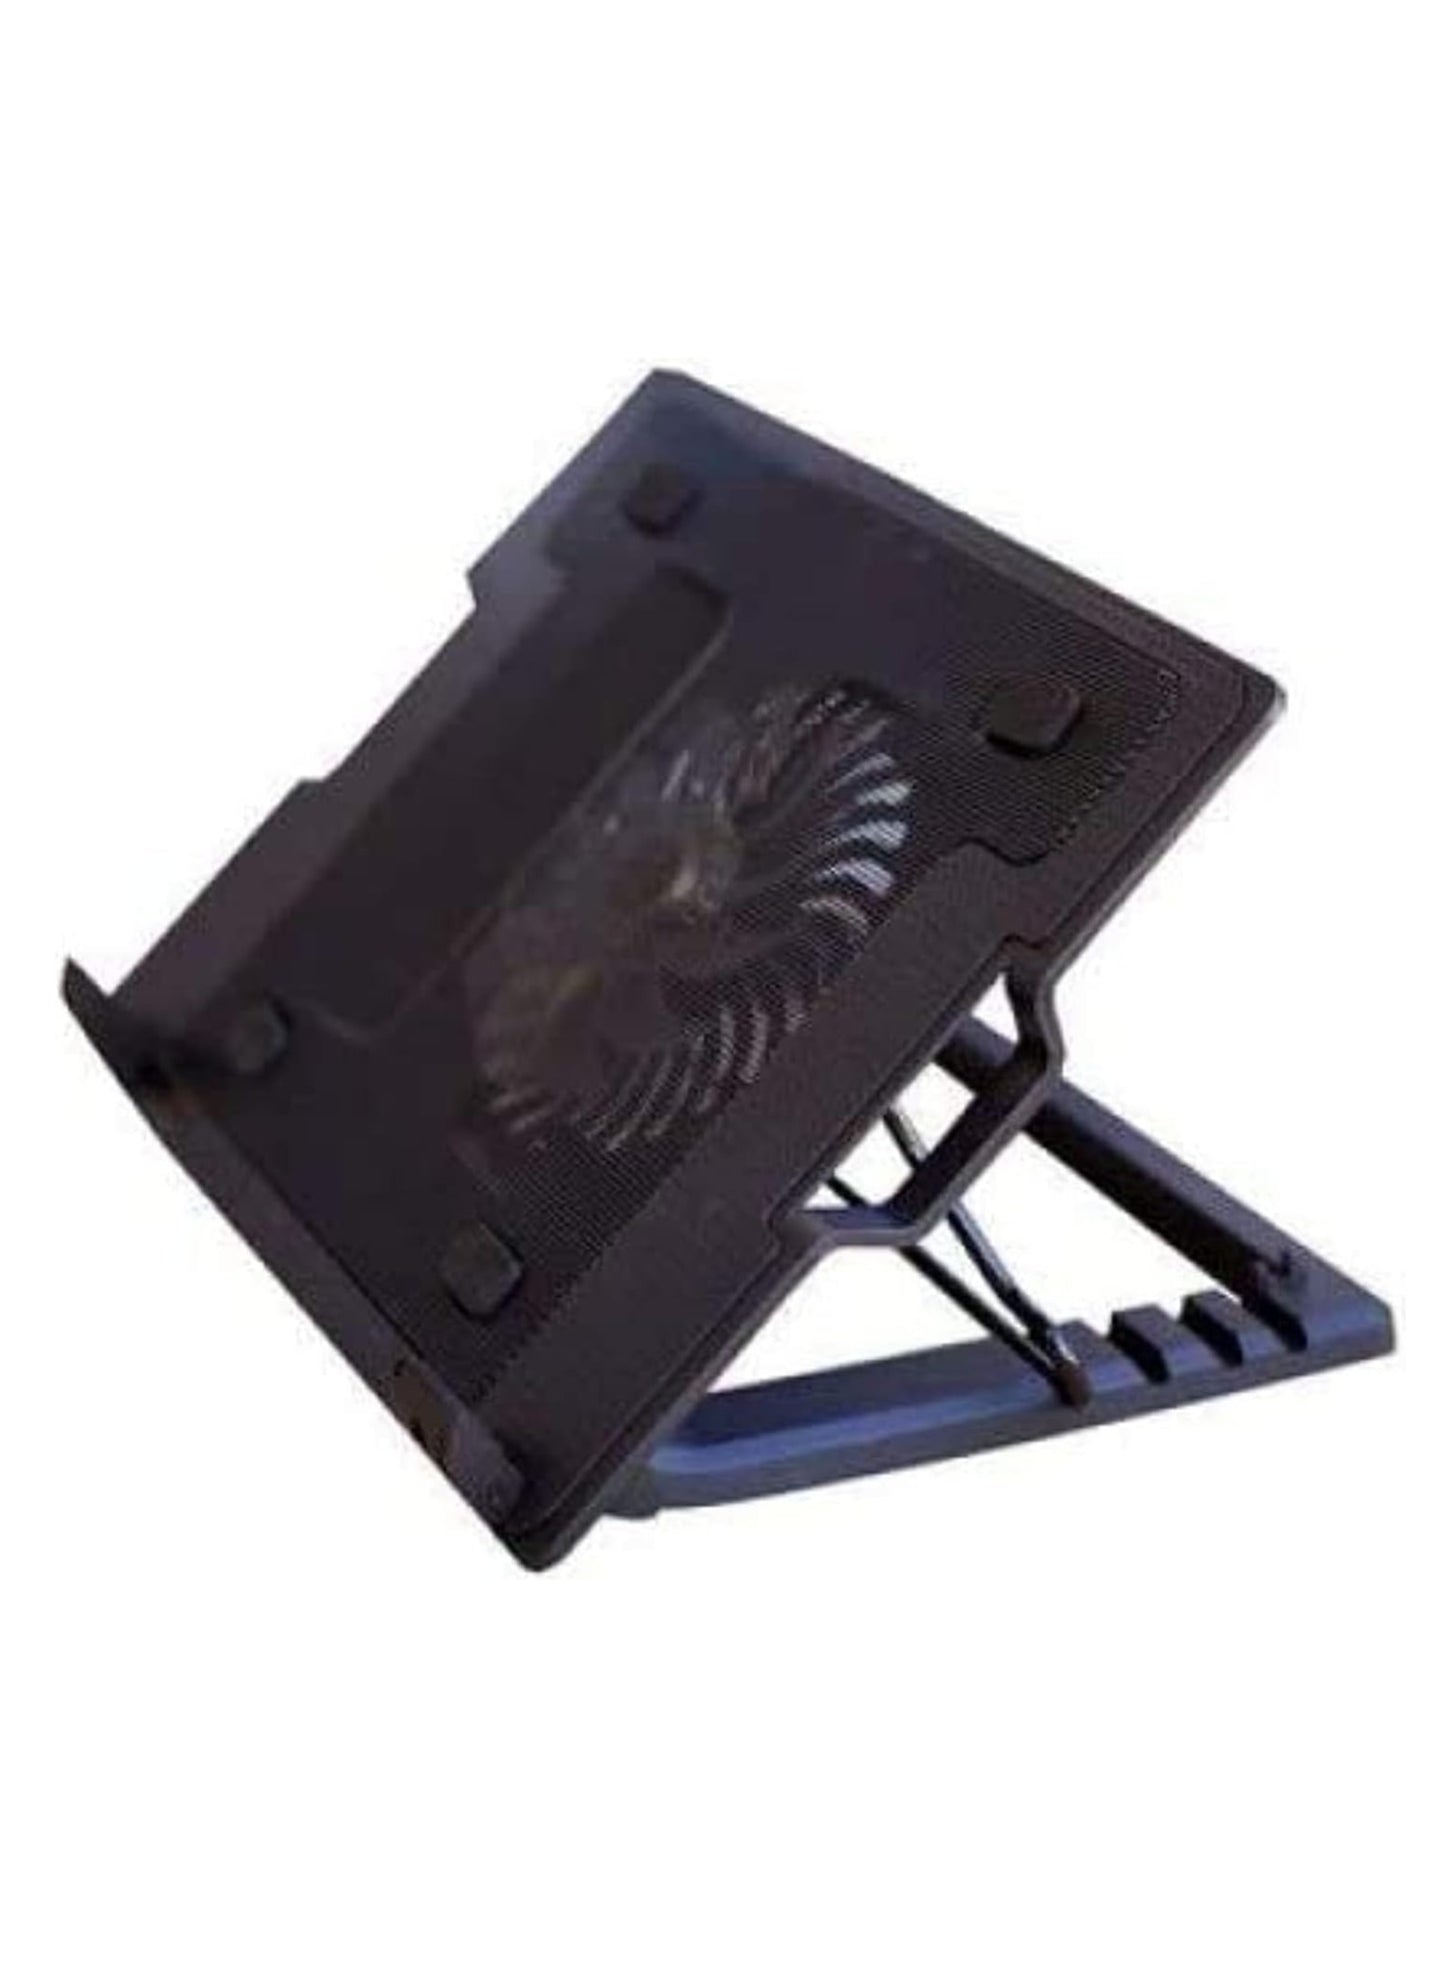 Laptop Cooling Fan With USB LED 2 Fan Cooling Cooler Adjustable Stand Pad for 9 Inch To 17 Inch Notebook Laptop